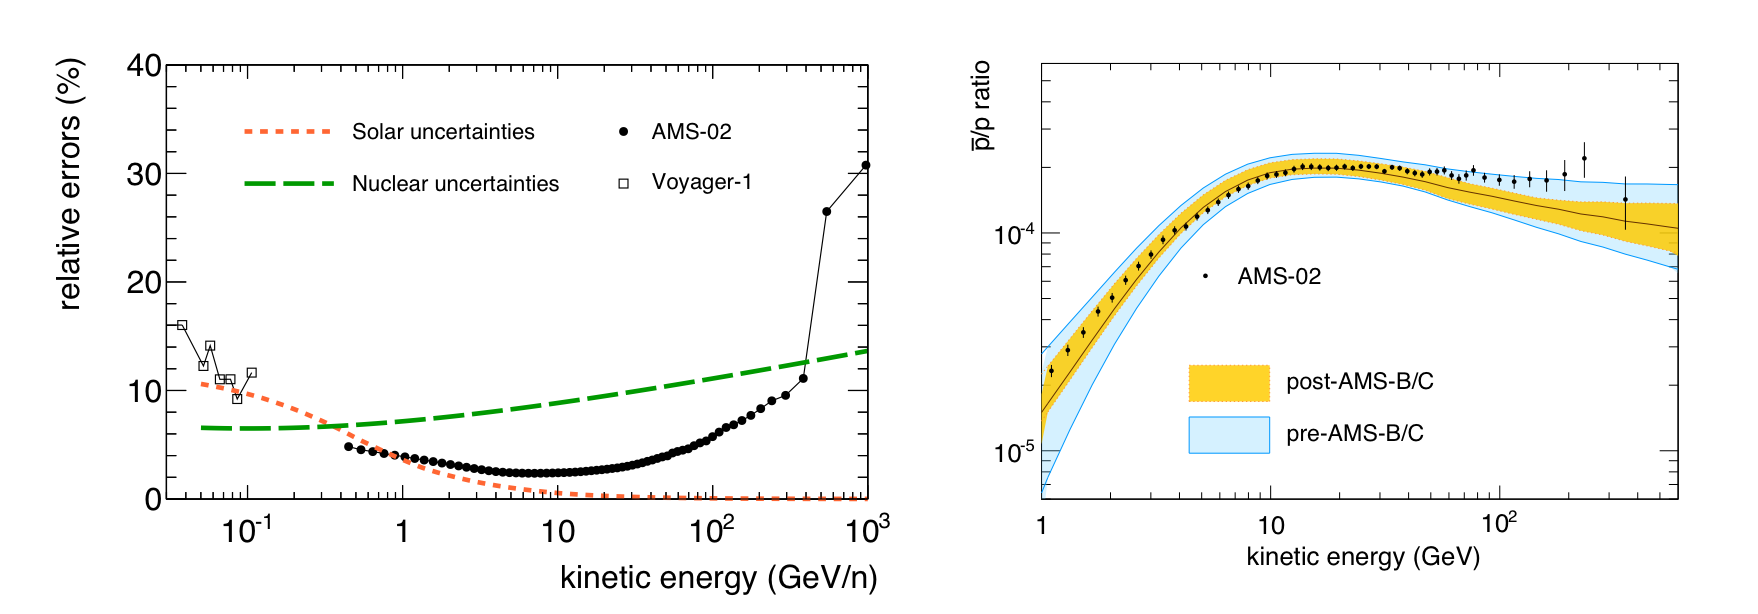 astrophysical uncertainties in CR propagation models